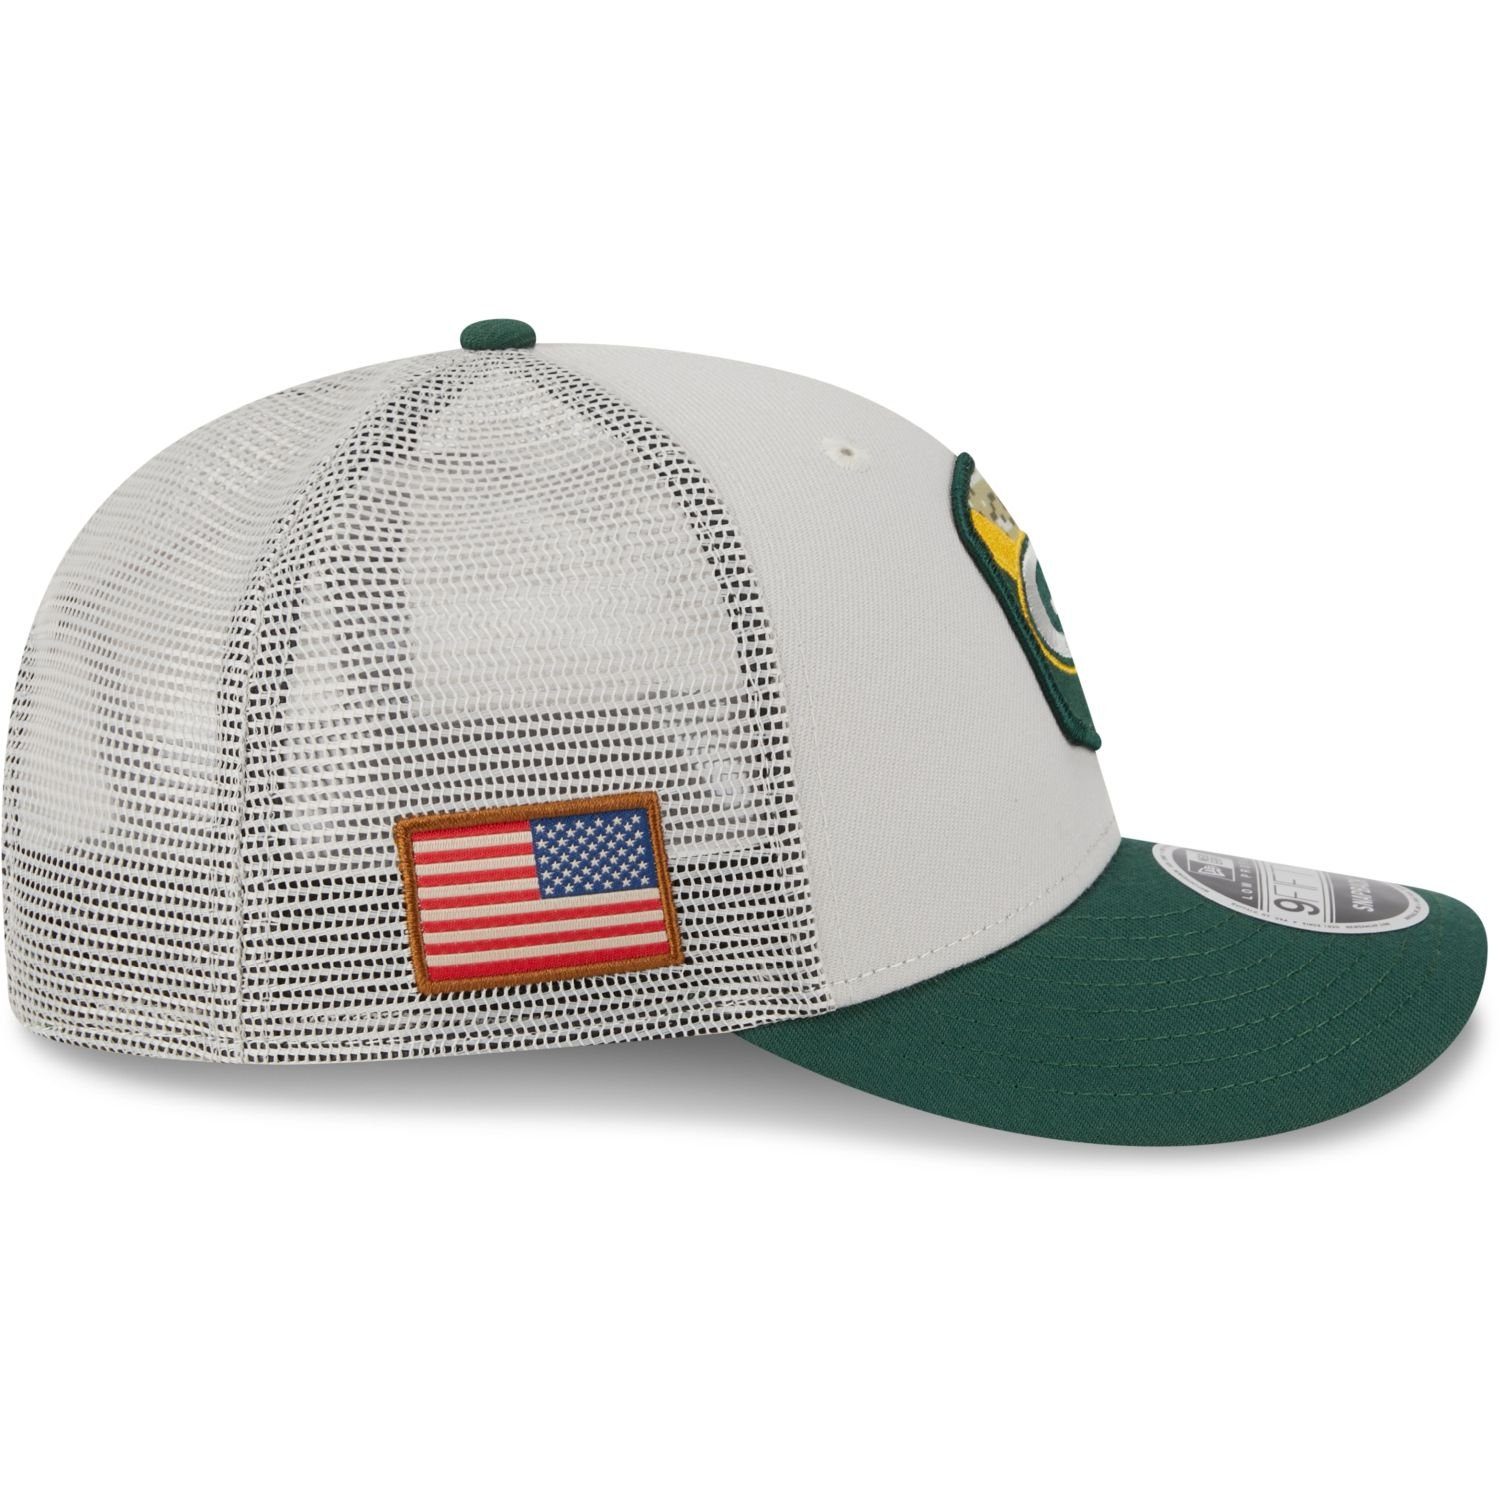 NFL Bay Snap Service Green Low 9Fifty Packers Cap New to Snapback Profile Era Salute